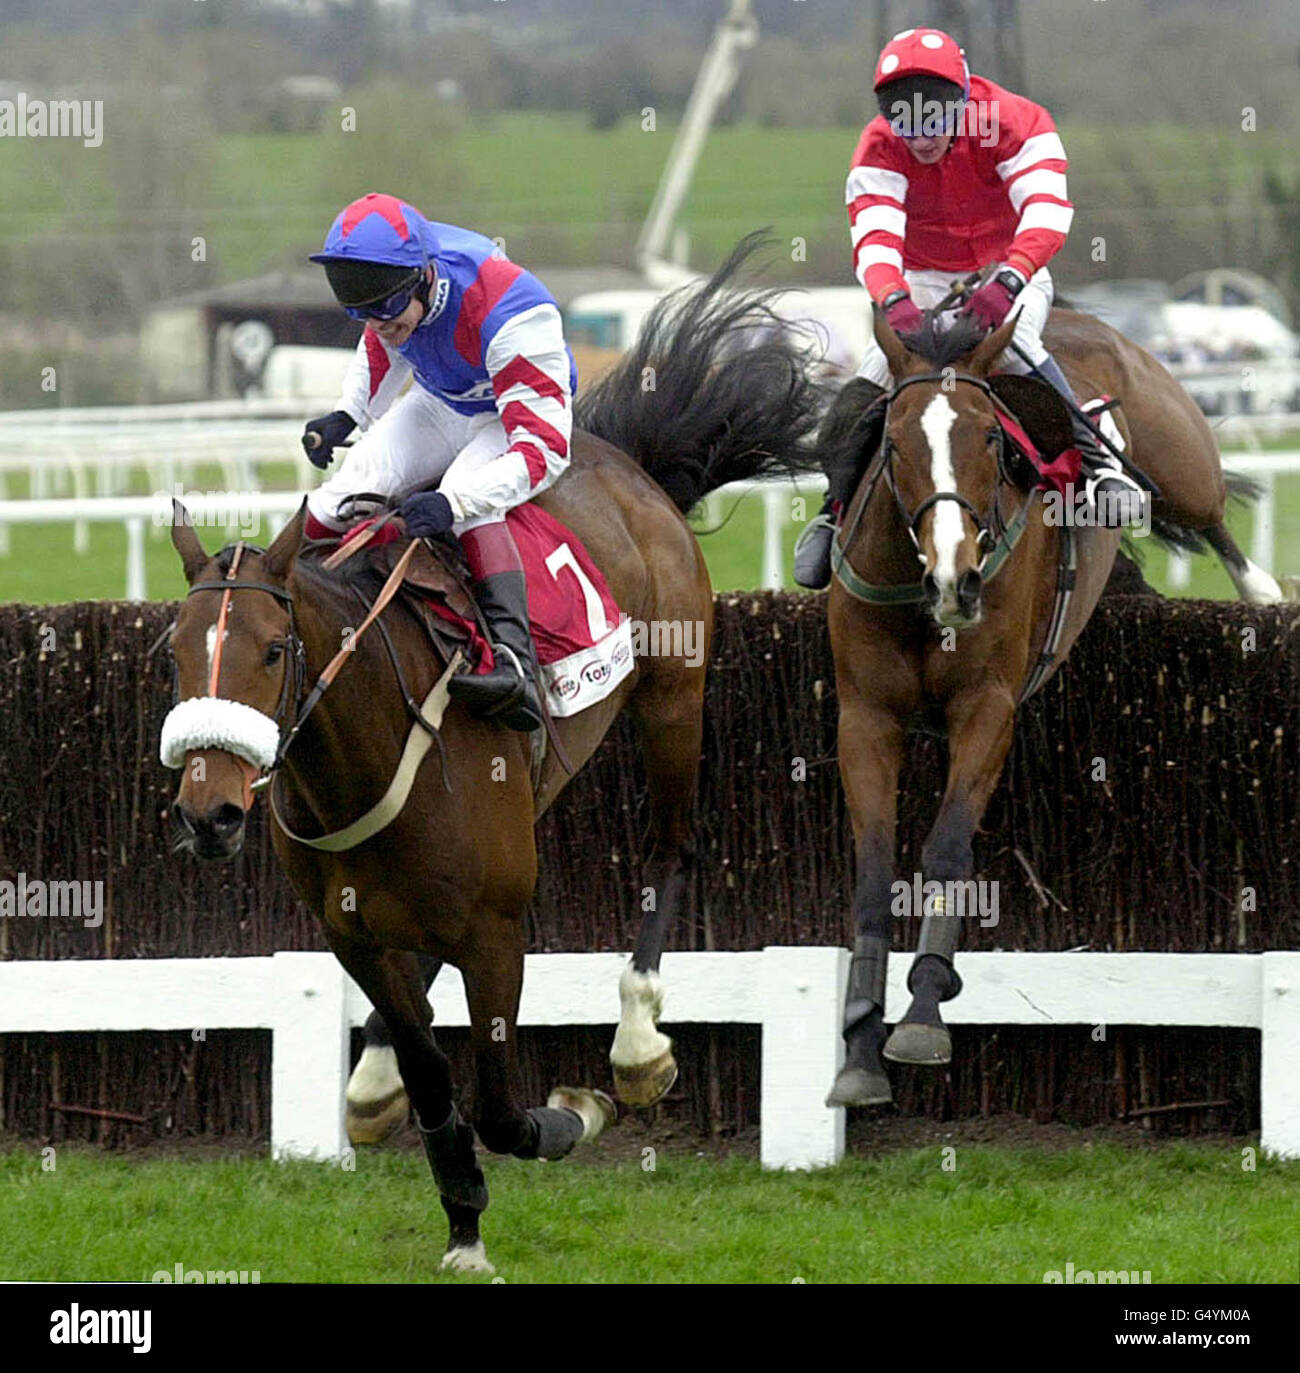 Winner of the Tote Cheltenham Gold Cup 'Looks Like Trouble', ridden by Richard Johnson clears the last fence ahead of Florida Pearl and Paul Carberry, during the final day of the Cheltenham Festival. Stock Photo